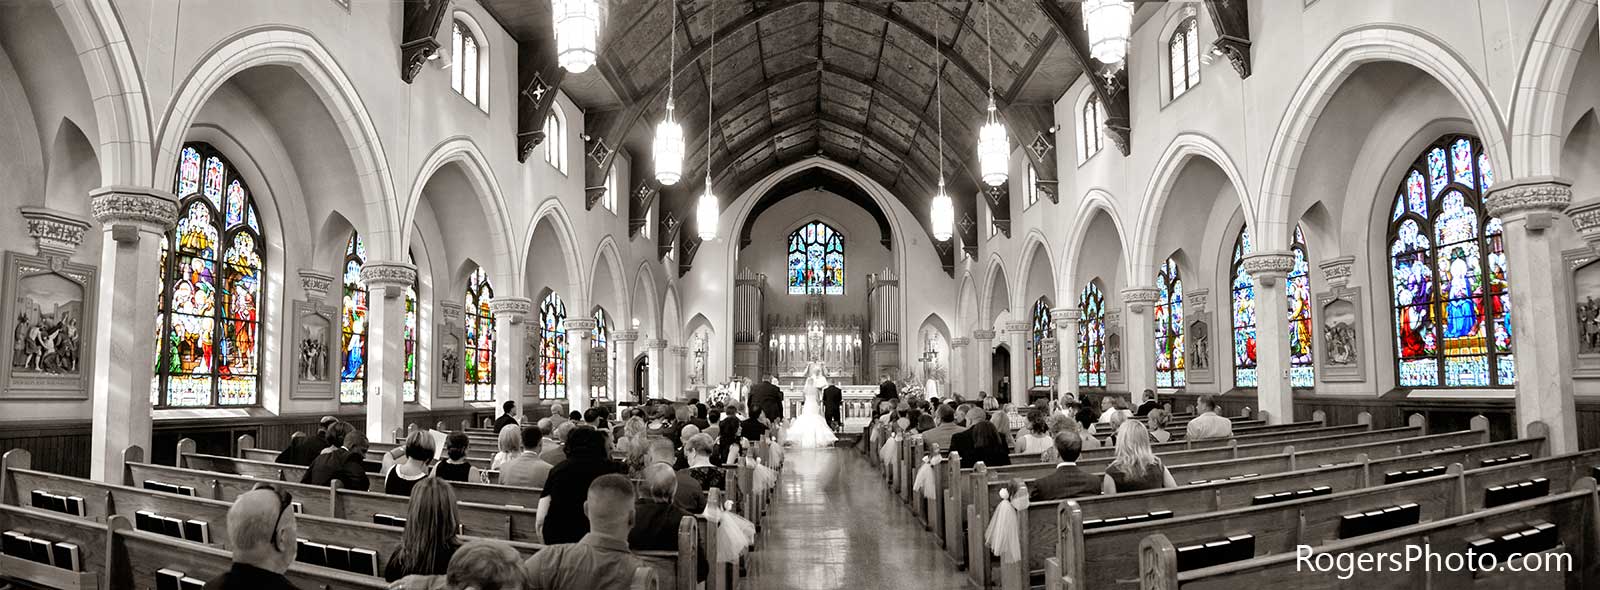  inside of a church wedding in Connecticut after photo retouching